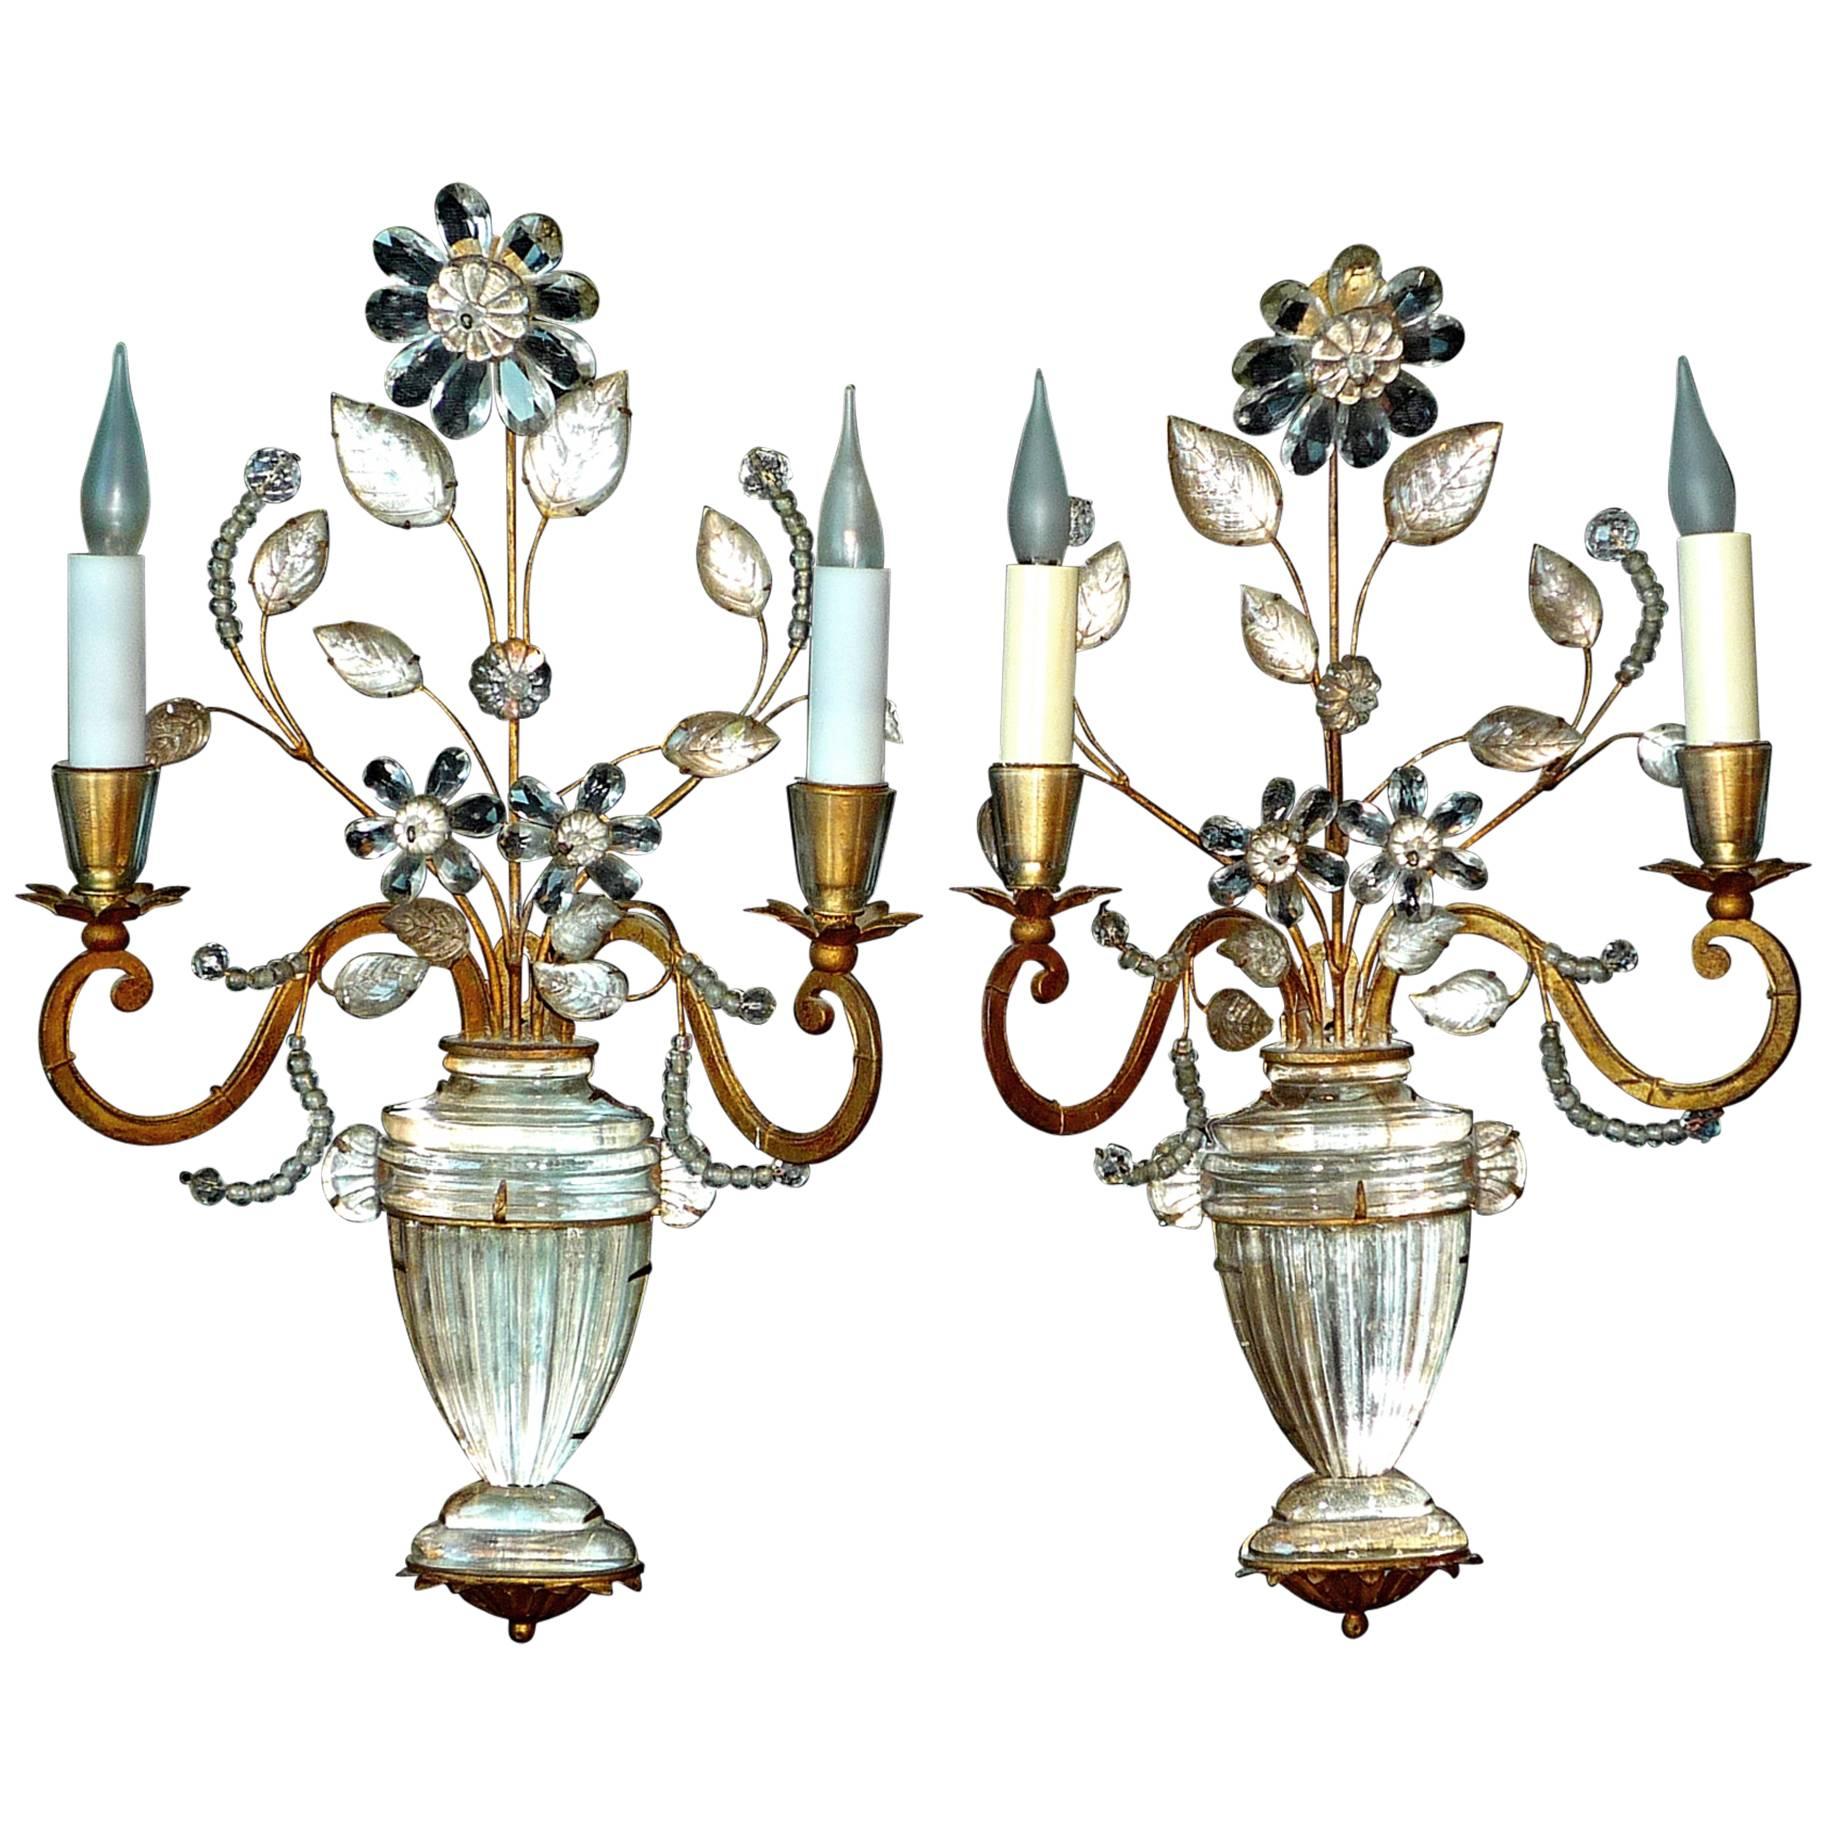 Pair of French Gilt Iron and Crystal Sconces, Maison Baguès, circa 1925